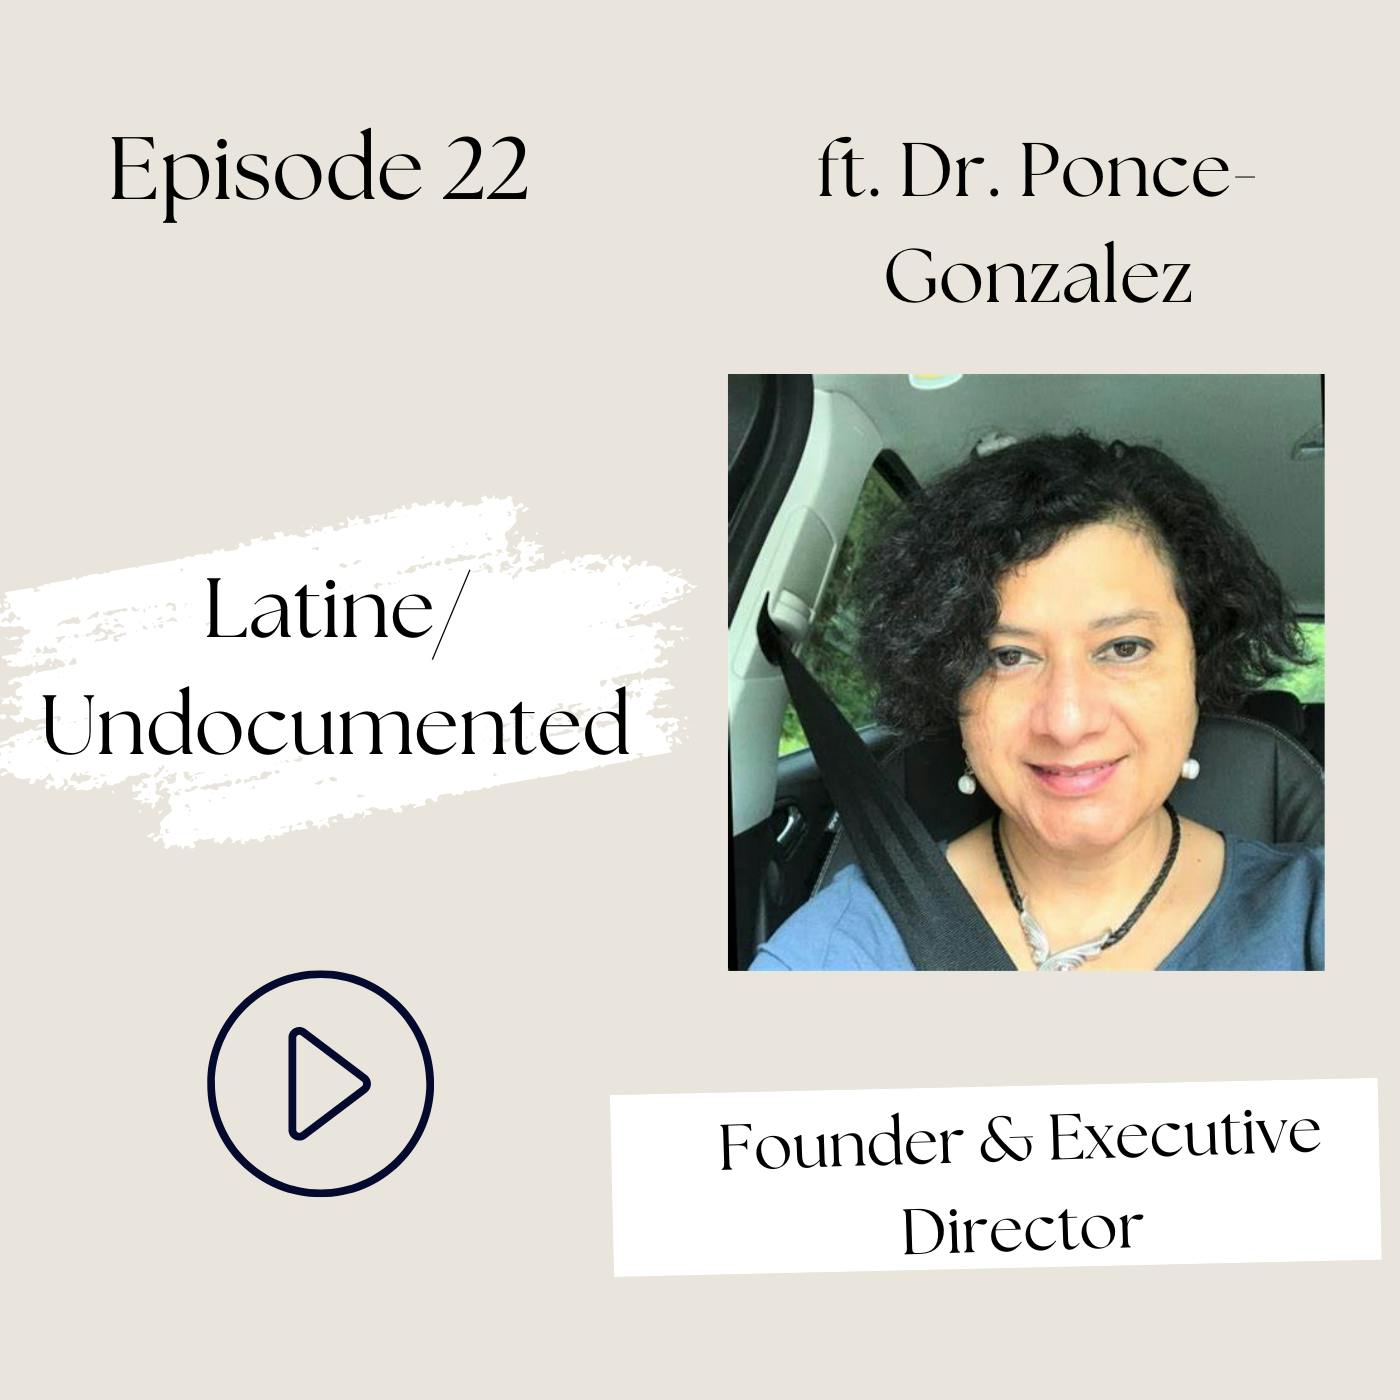 Healthcare For Humans: Latine/Using Community Health Workers to Care for the Undocumented